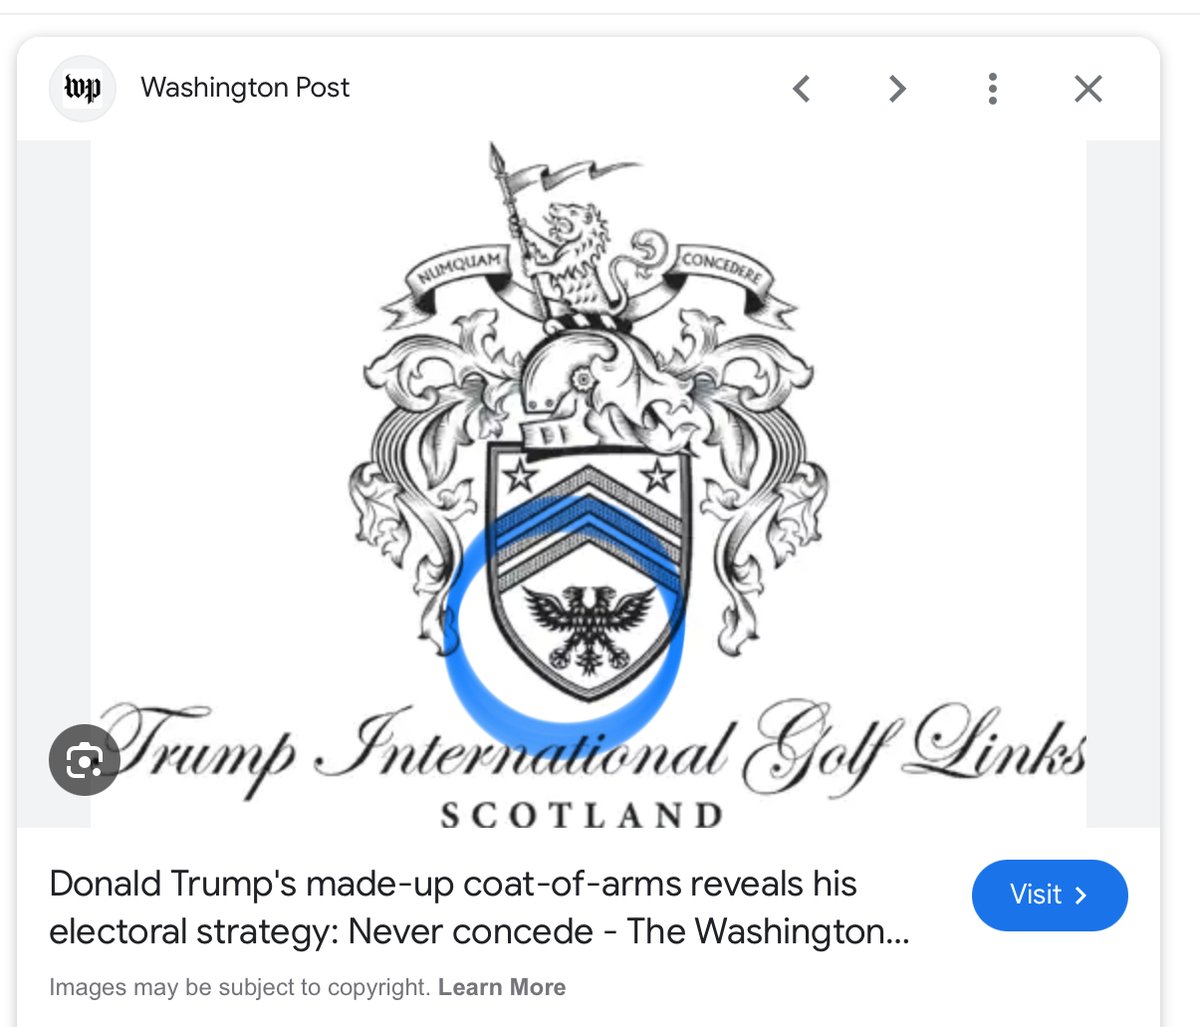 The Luciferian filth will lie until their last gasp of air. But the good news is that they’re going to burn in hell. Russia has the freemasonic double-headed eagle as the Trump coat of arms. There‘s no real conflict among nations, only Luciferian lies.